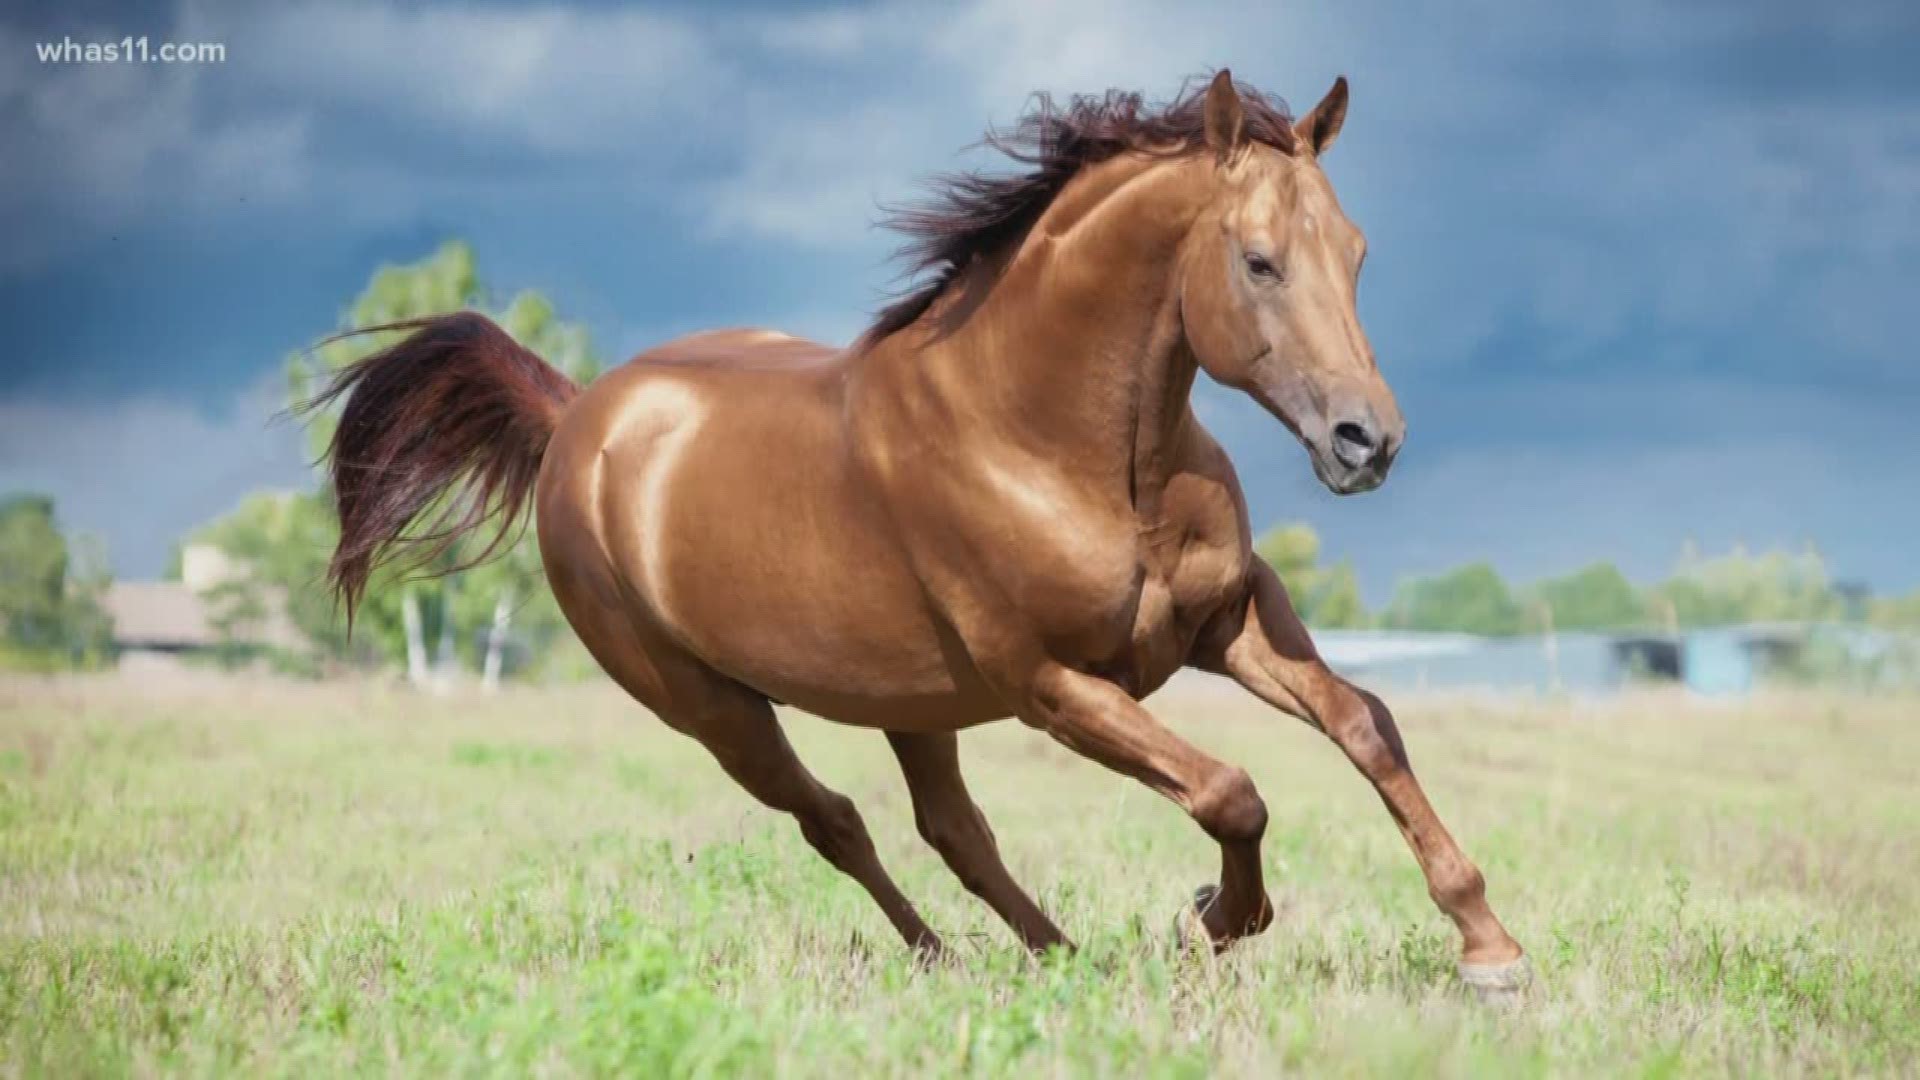 Oftentimes, horses that break their legs have to be euthanized. Why does this happen? Rob Harris talks to a Kentucky veterinarian to find out "WHAS Up".